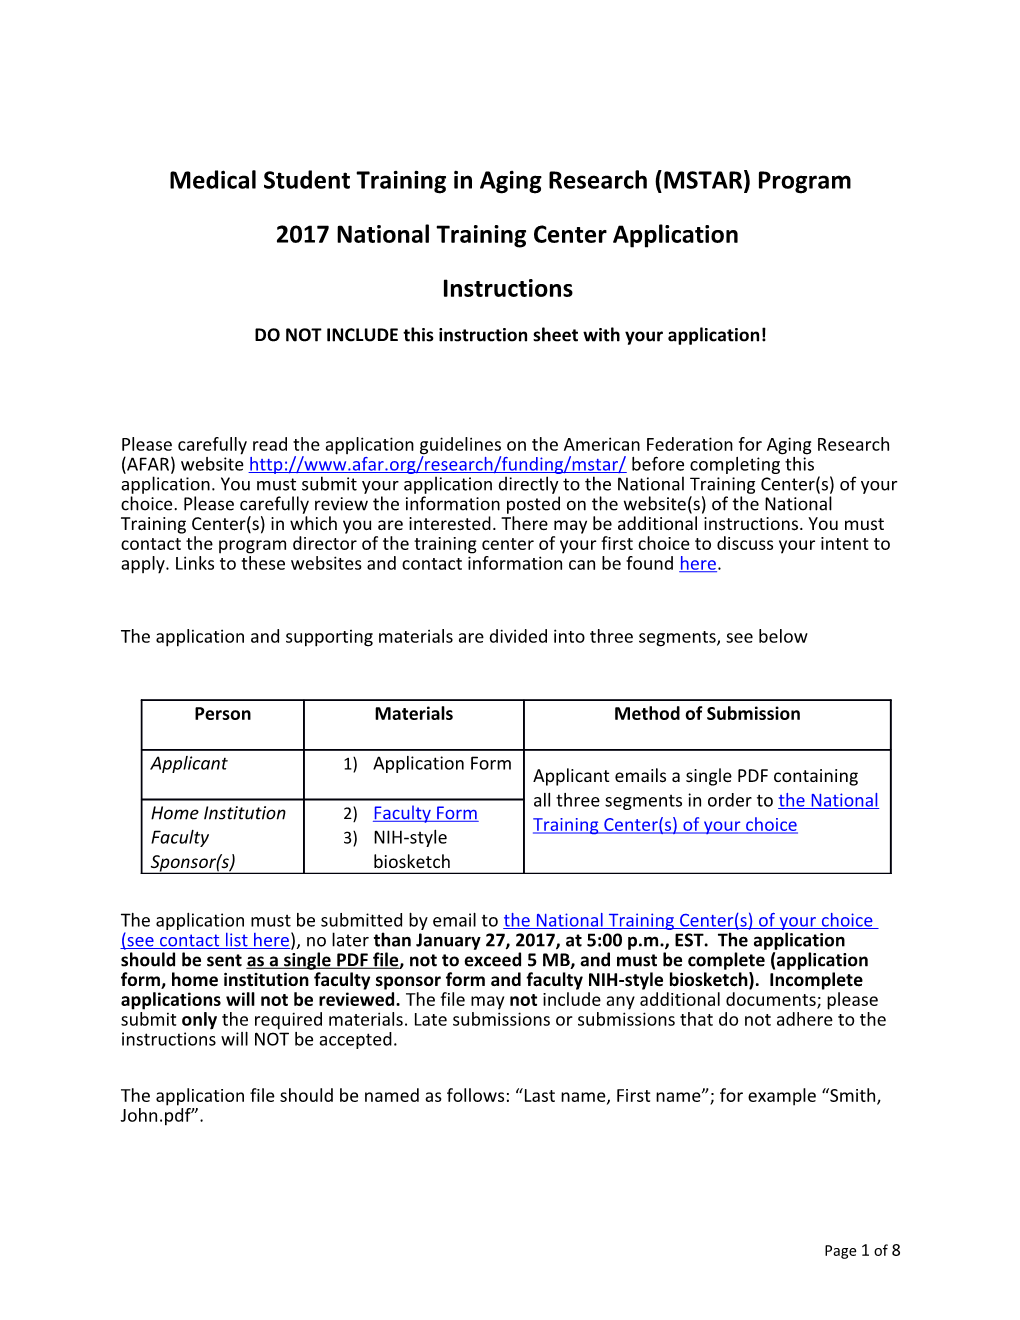 Medical Student Training in Aging Research (MSTAR) Program